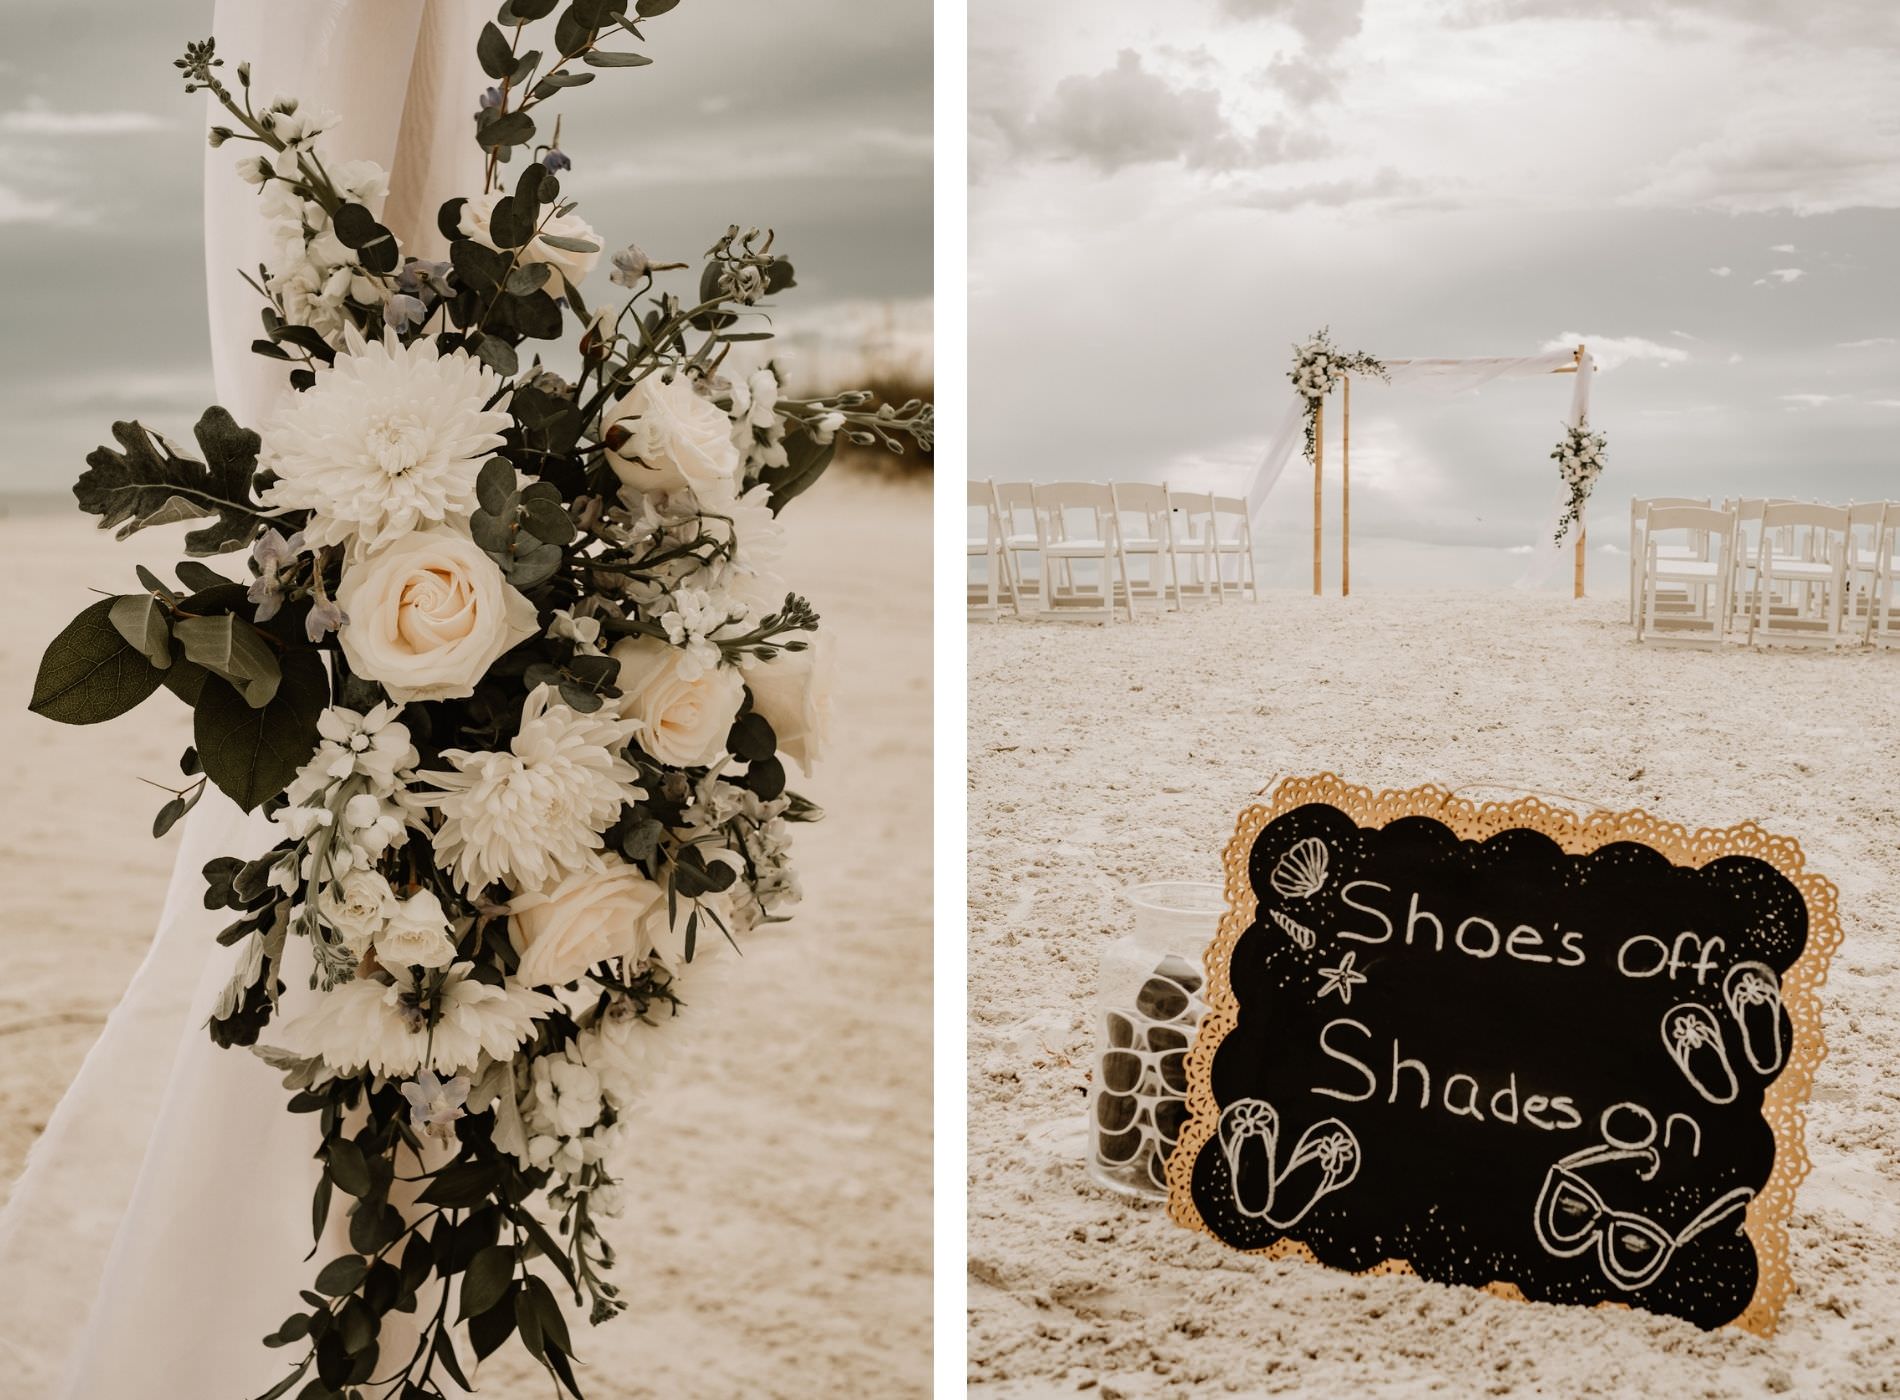 Beach Wedding Ceremony Venue at Hilton Clearwater Beach | White Folding Garden Chairs and Bamboo Arch with Sheer Draping and Greenery Floral Arrangement Tie Backs with White Roses Chrysanthemums and Stock | Shoes Off Shades On Sign for Barefoot Beach Wedding with Sunglasses Favors